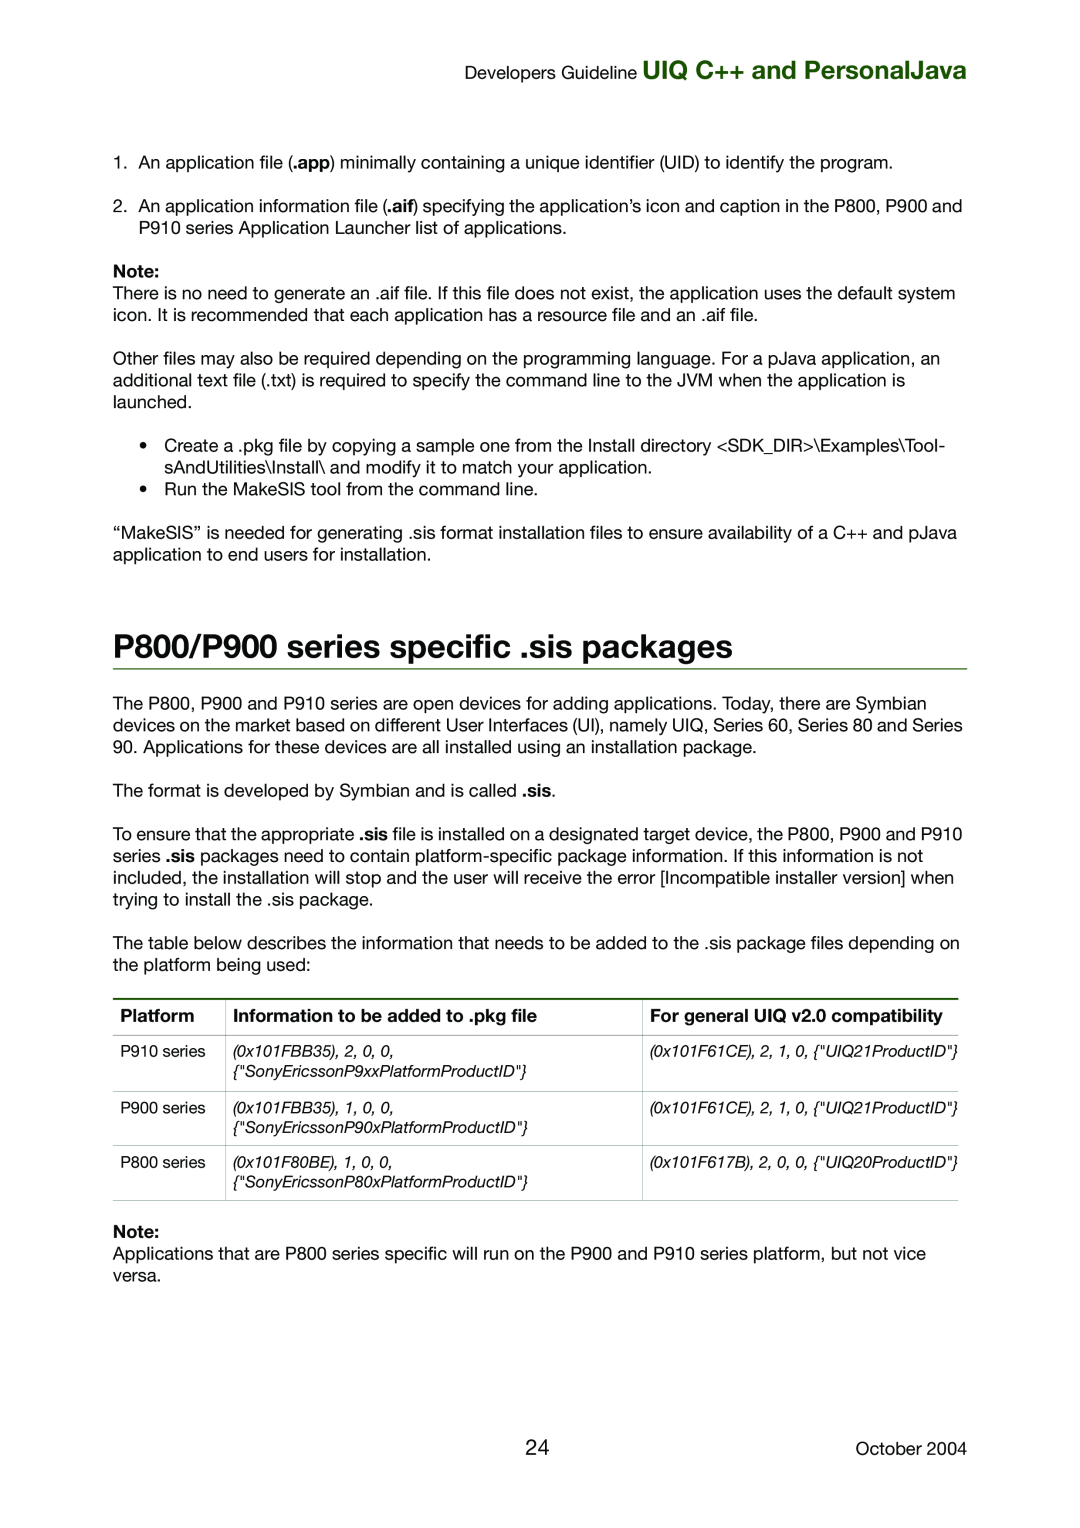 Sony Ericsson manual P800/P900 series specific .sis packages, Developers Guideline UIQ C++ and PersonalJava, Platform 